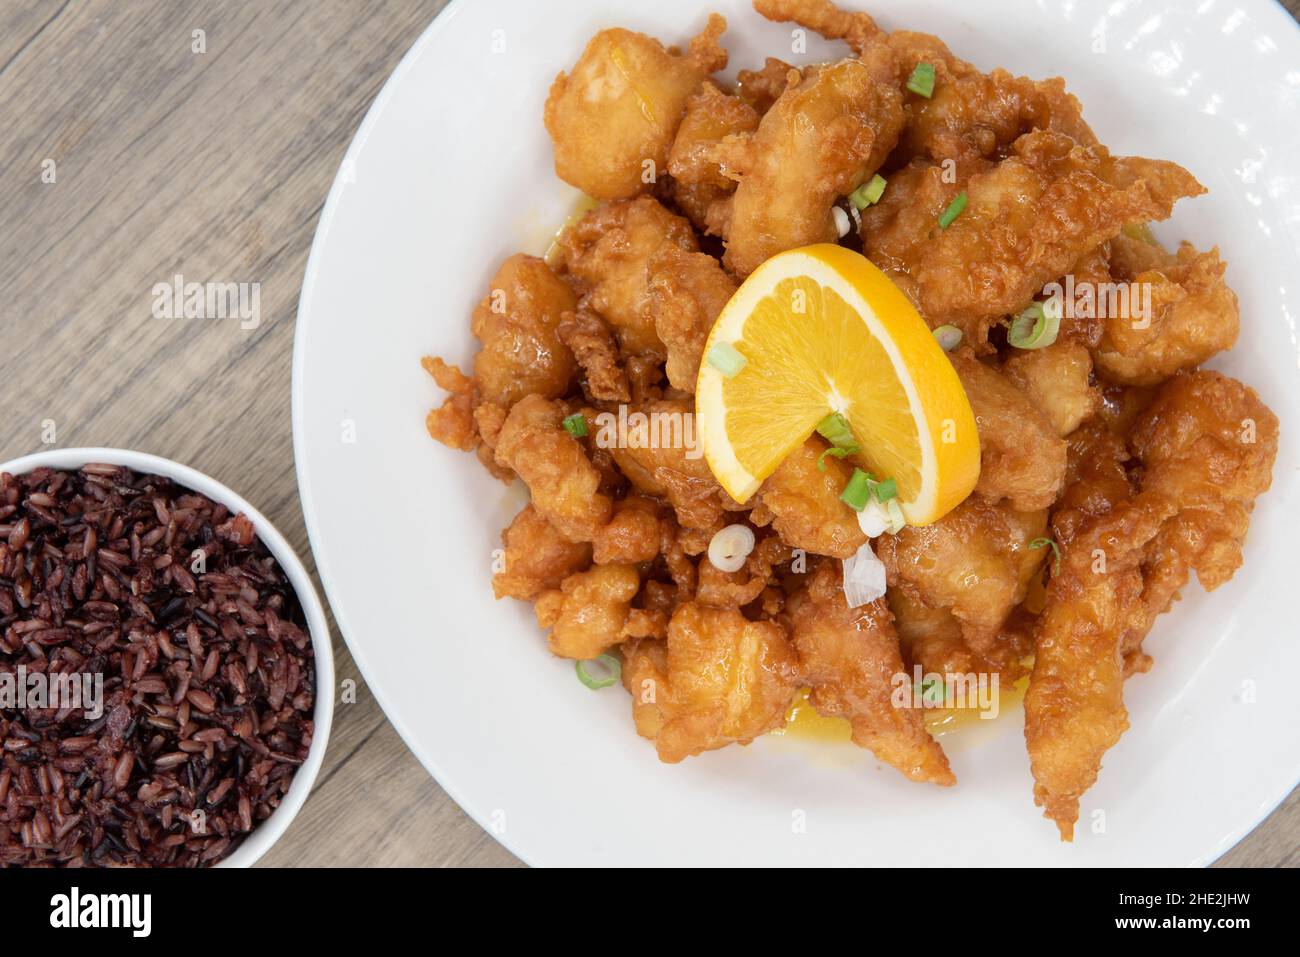 Overhead view of breaded orange chicken crispy on the outside with sliced citrus twist on top of generous pile of food. Stock Photo